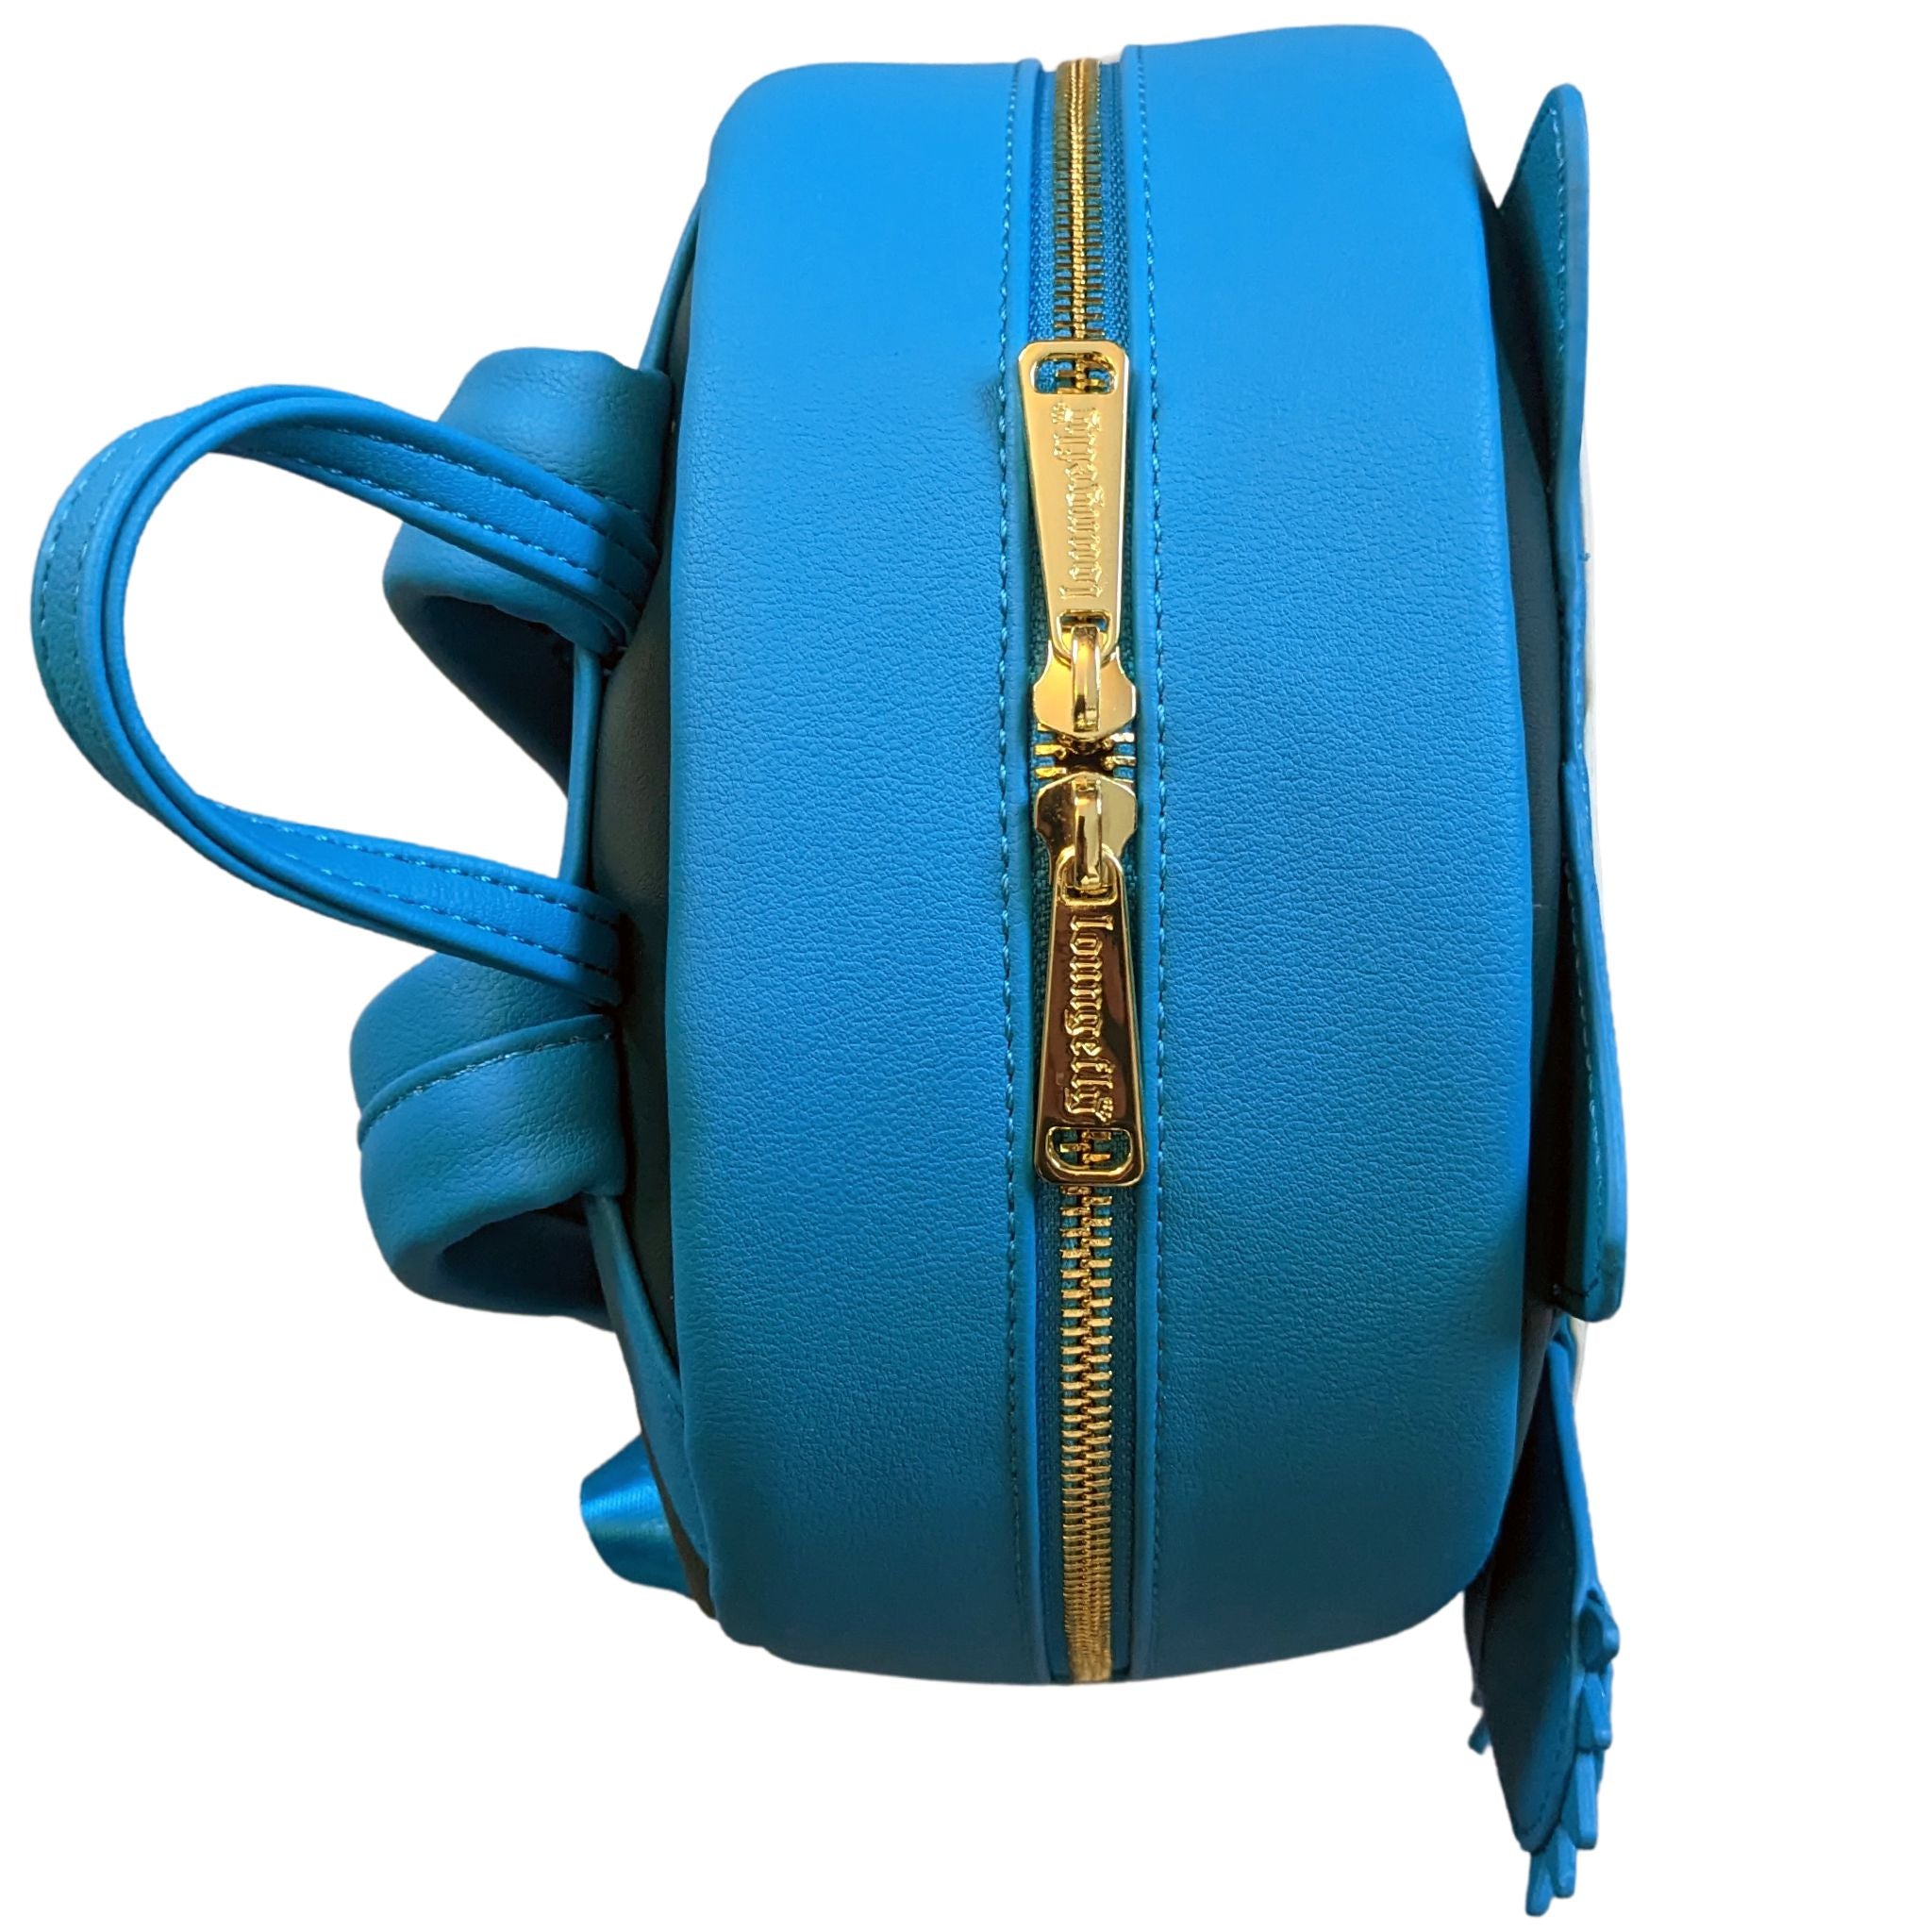 Boutiques at Tiffany's - New Loungefly backpack and wallet in